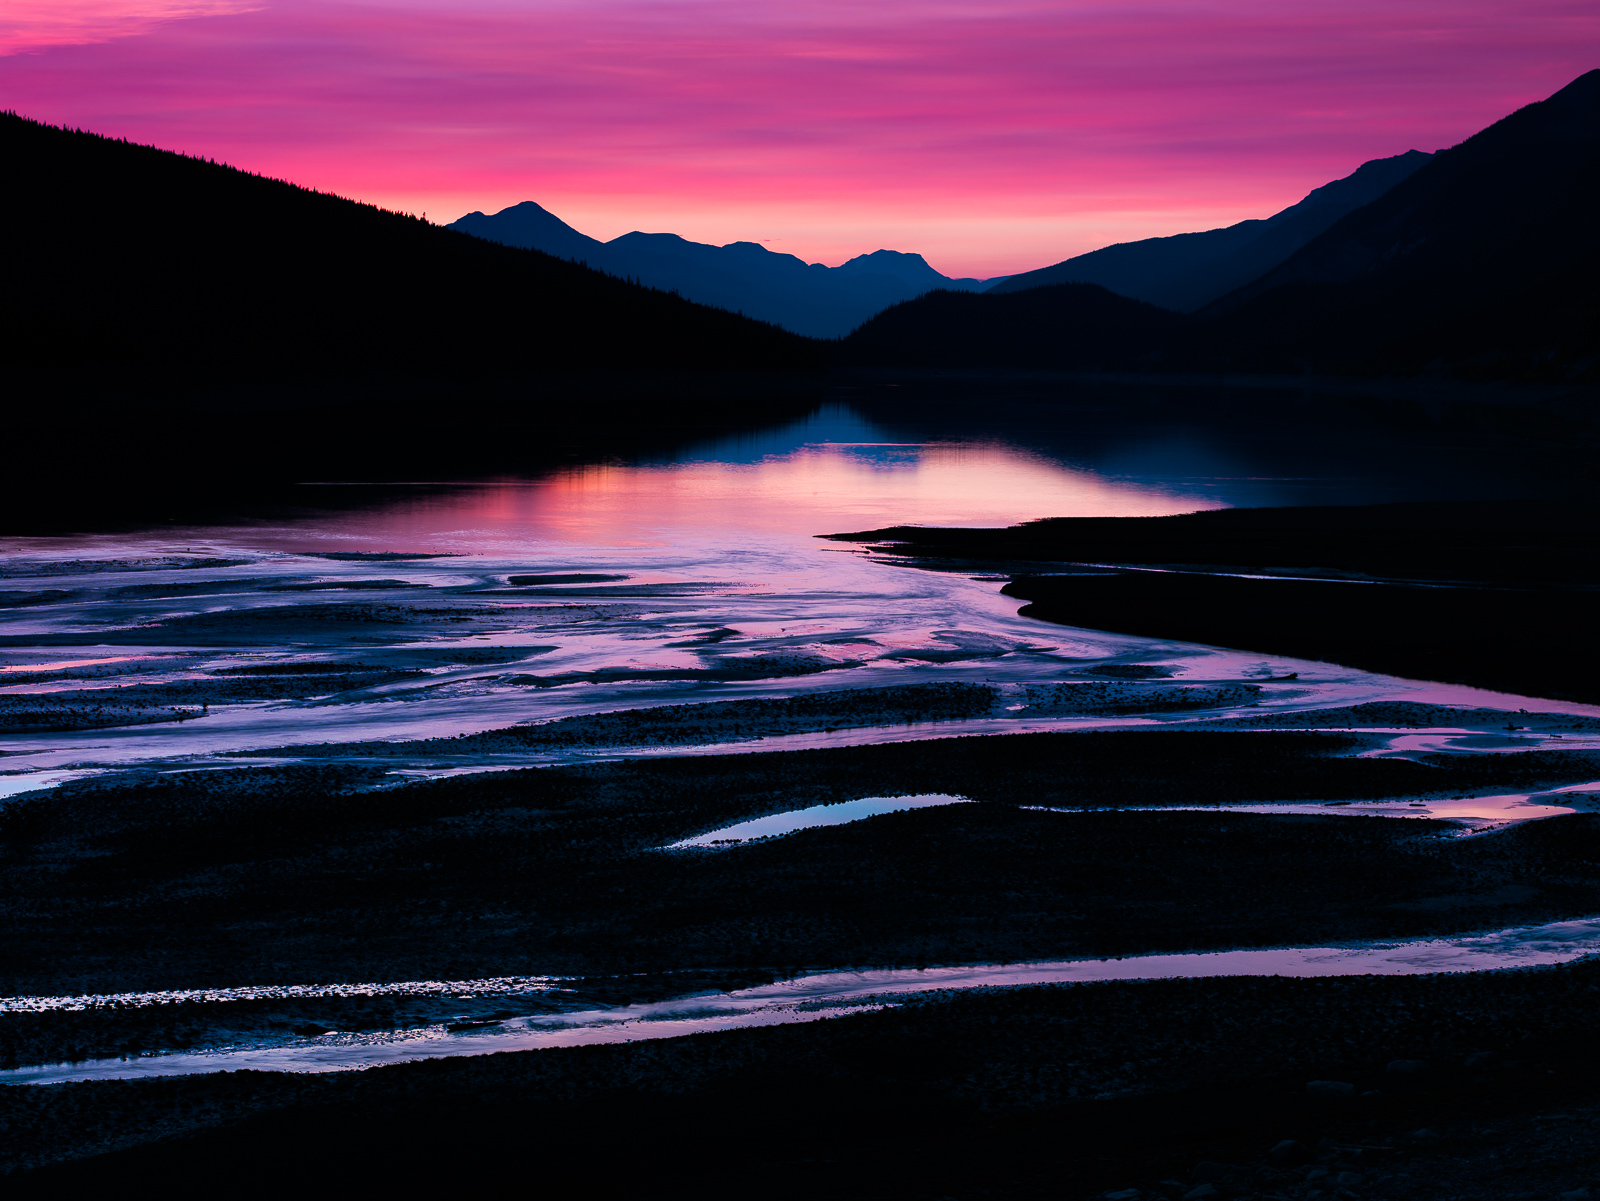 Medicine Lake at sunset offers patterns of light bouncing off the waters from the filling streams.